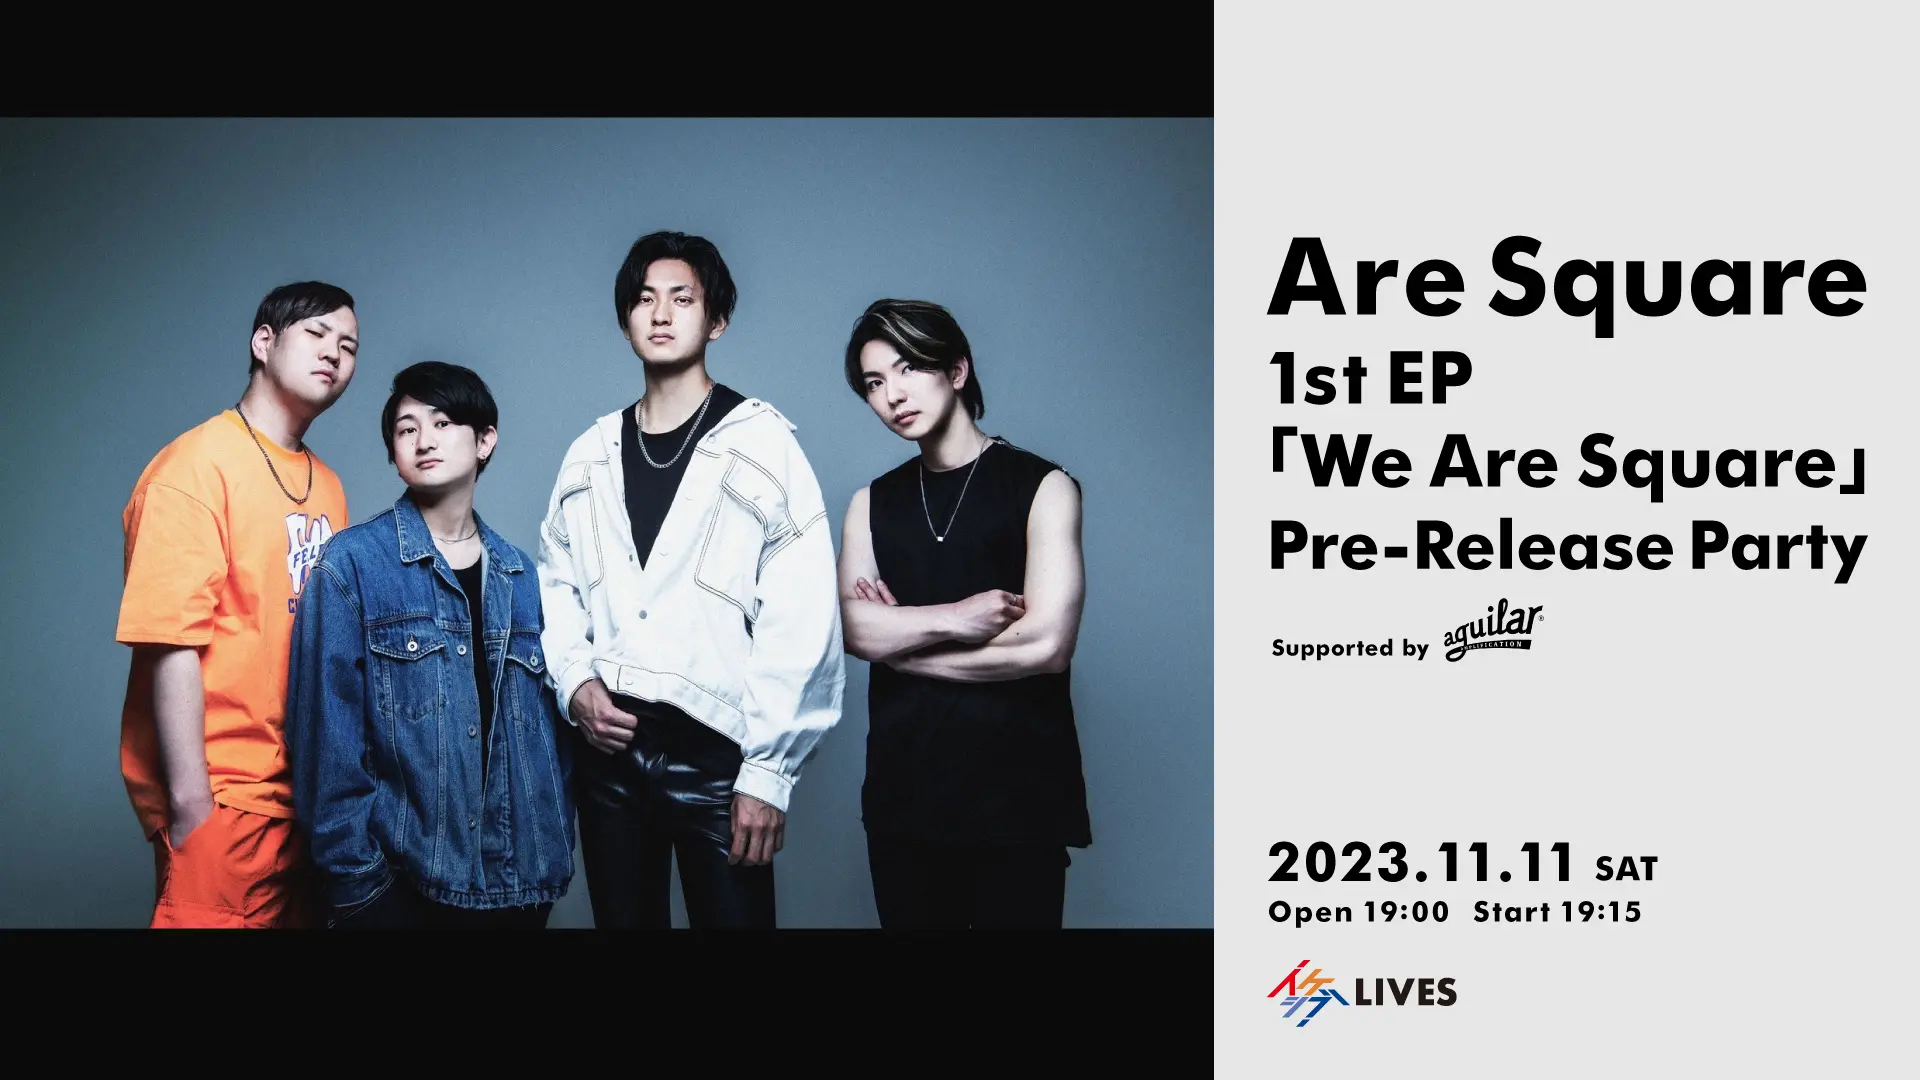 Are Square 1st EP 「We Are Square」 Release Party Supported by Aguilar